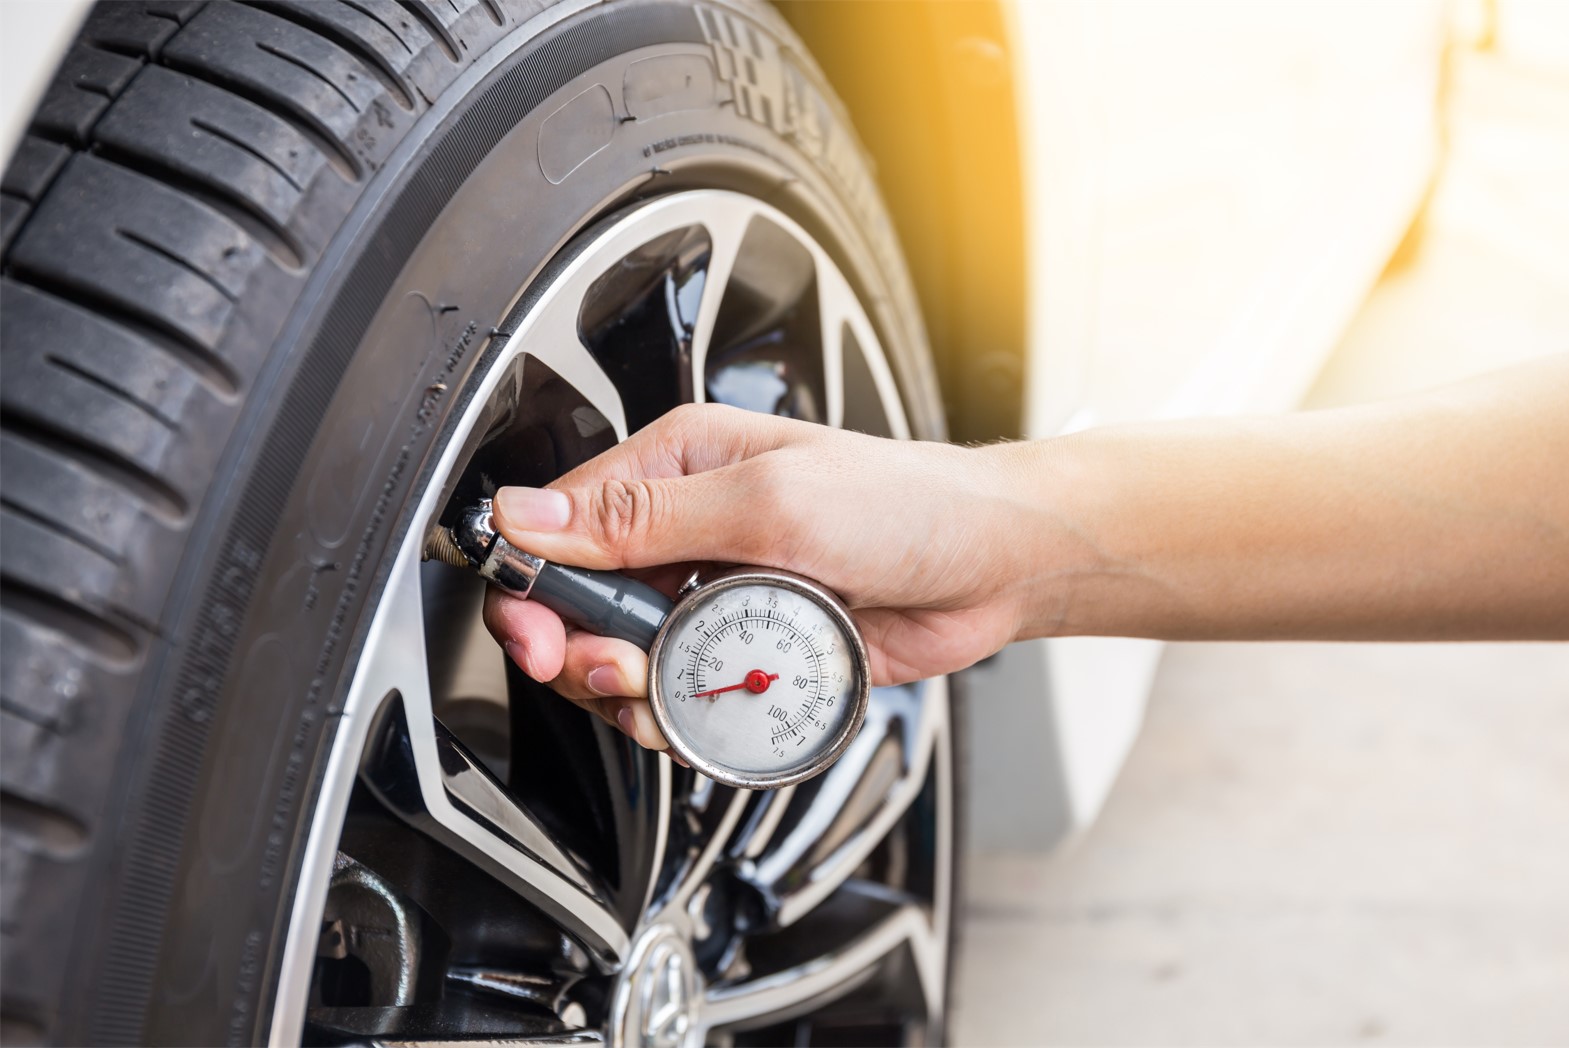 Are You Using Your Tire Air Pressure Gauge the Right Way?